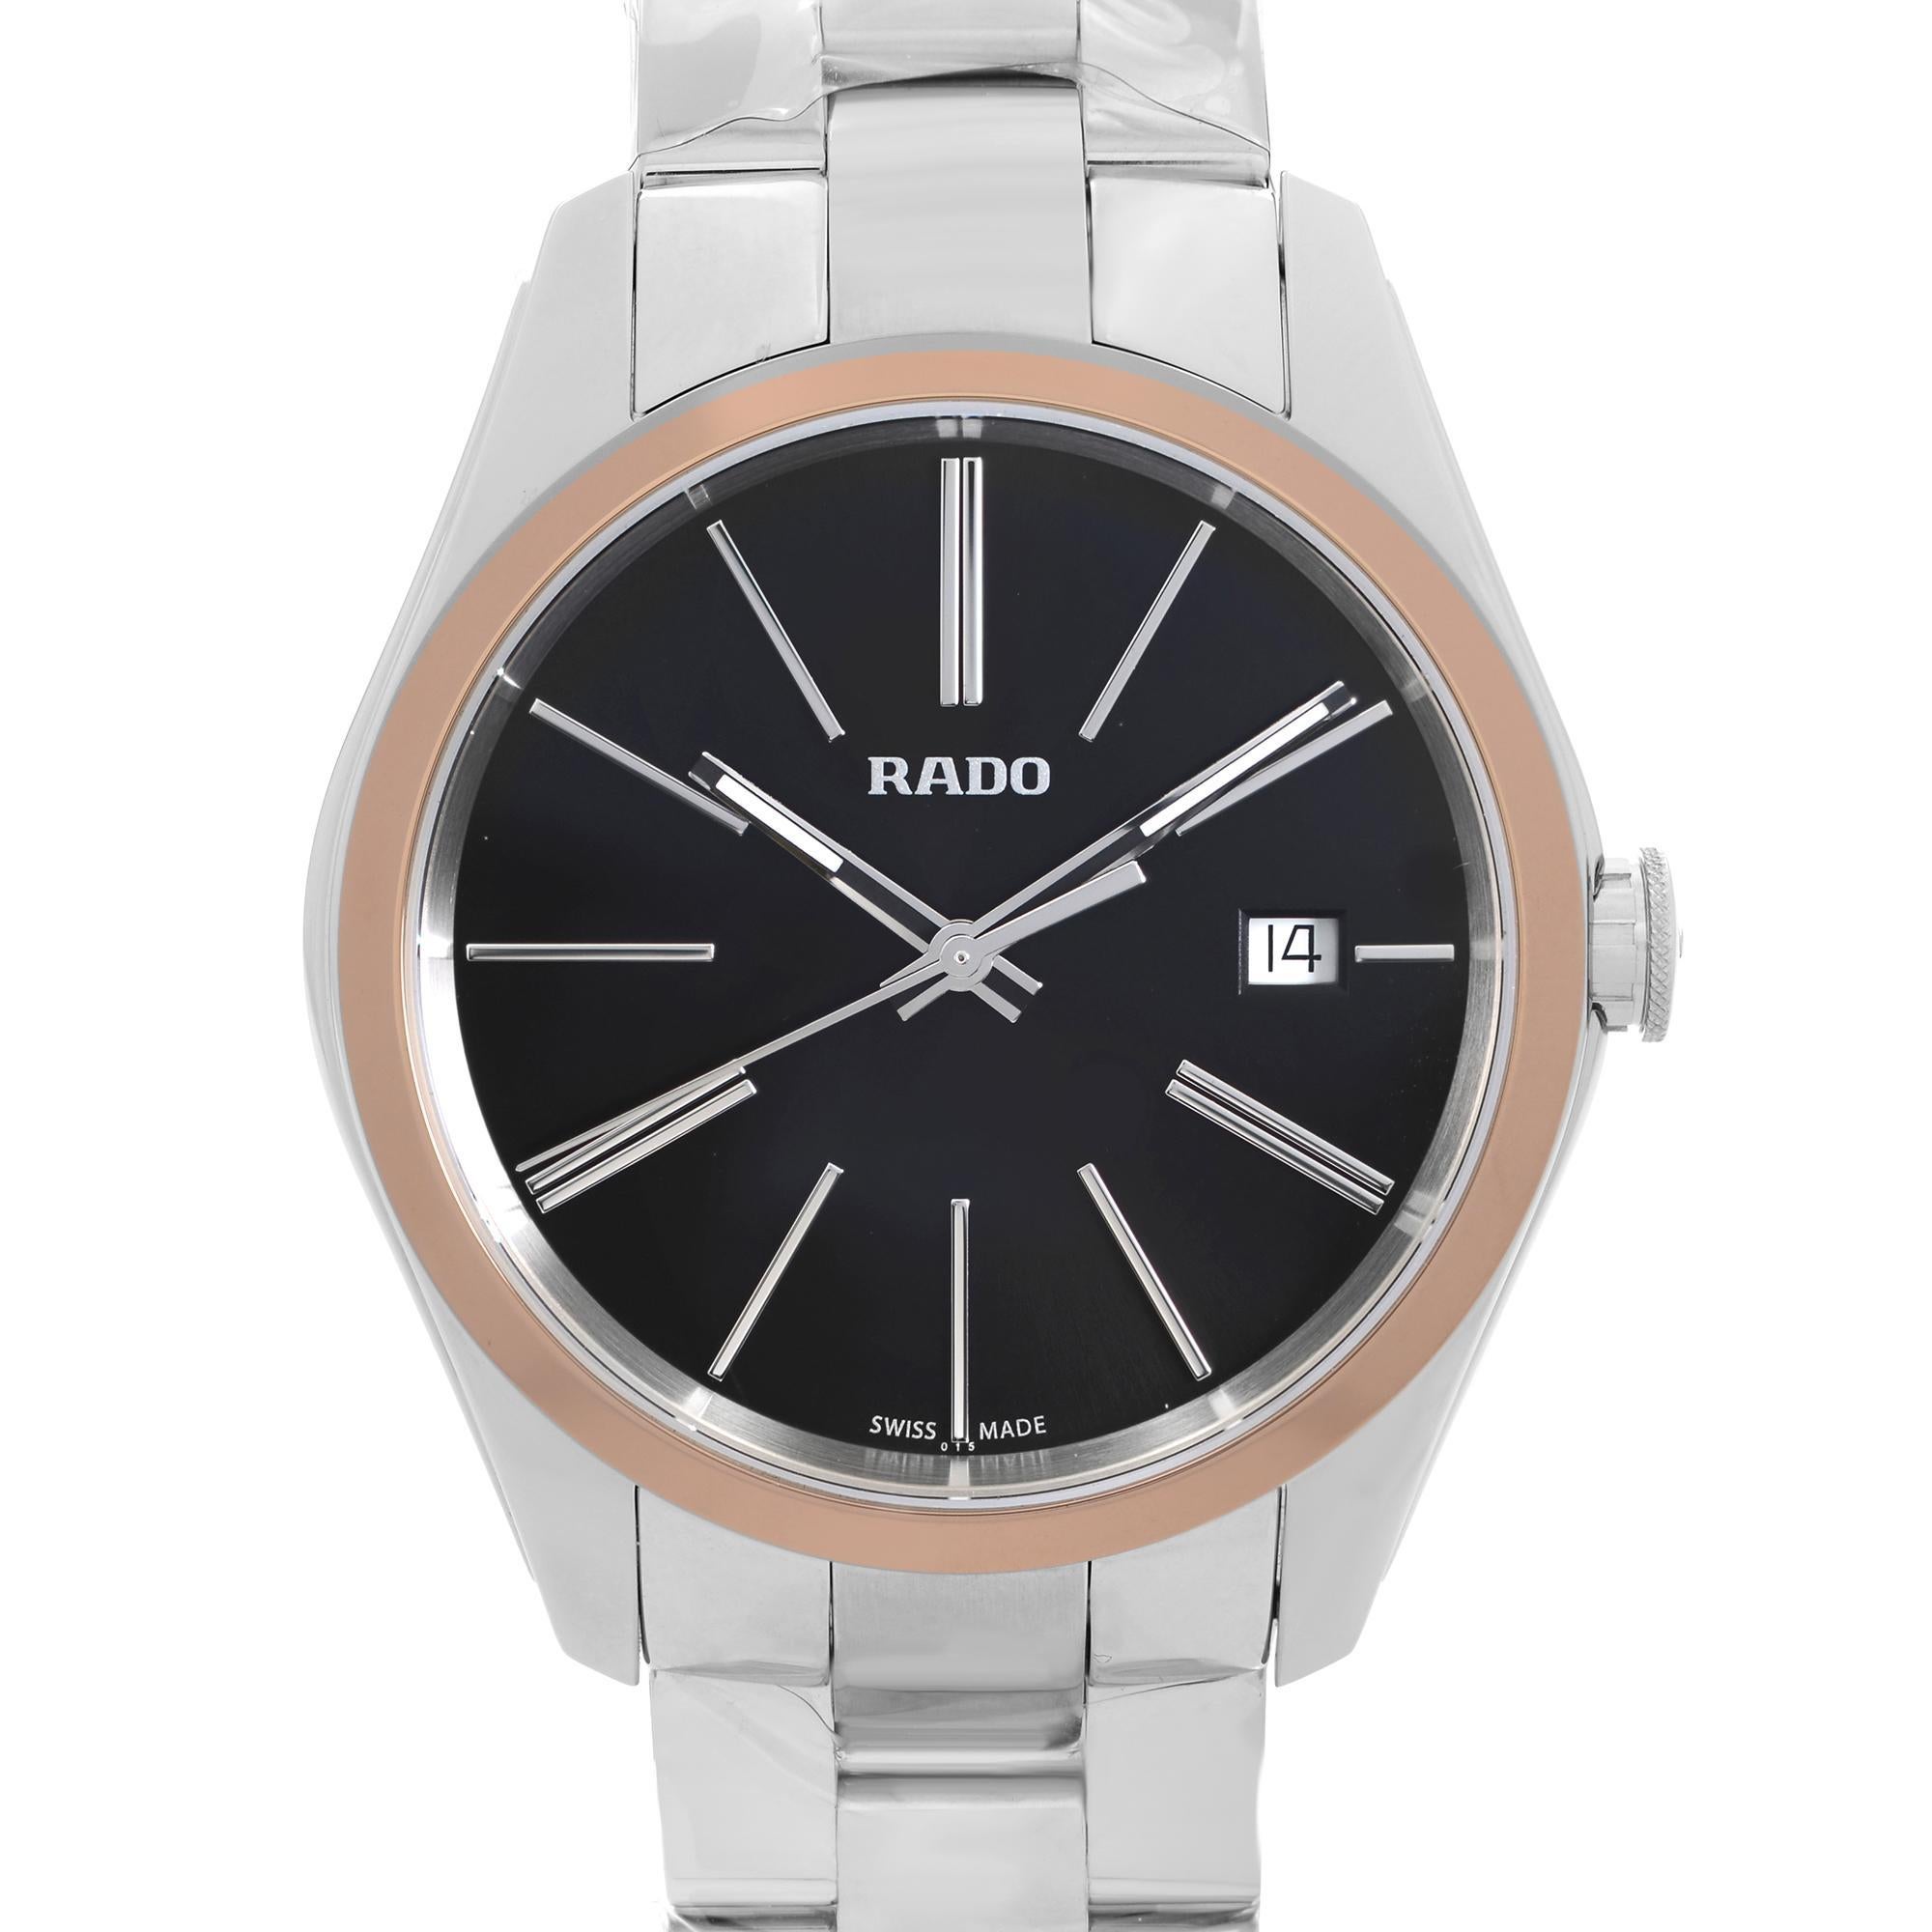 Display Model Rado Hyperchrome 40mm Steel Ceramic Date Black Dial Mens Quartz Watch R32184163. Powered By a Quartz Movement This Beautiful Men's Timepiece Features: Stainless Steel Case and Bracelet, Fixed Rose Gold-Tone Bezel, Black Dial with